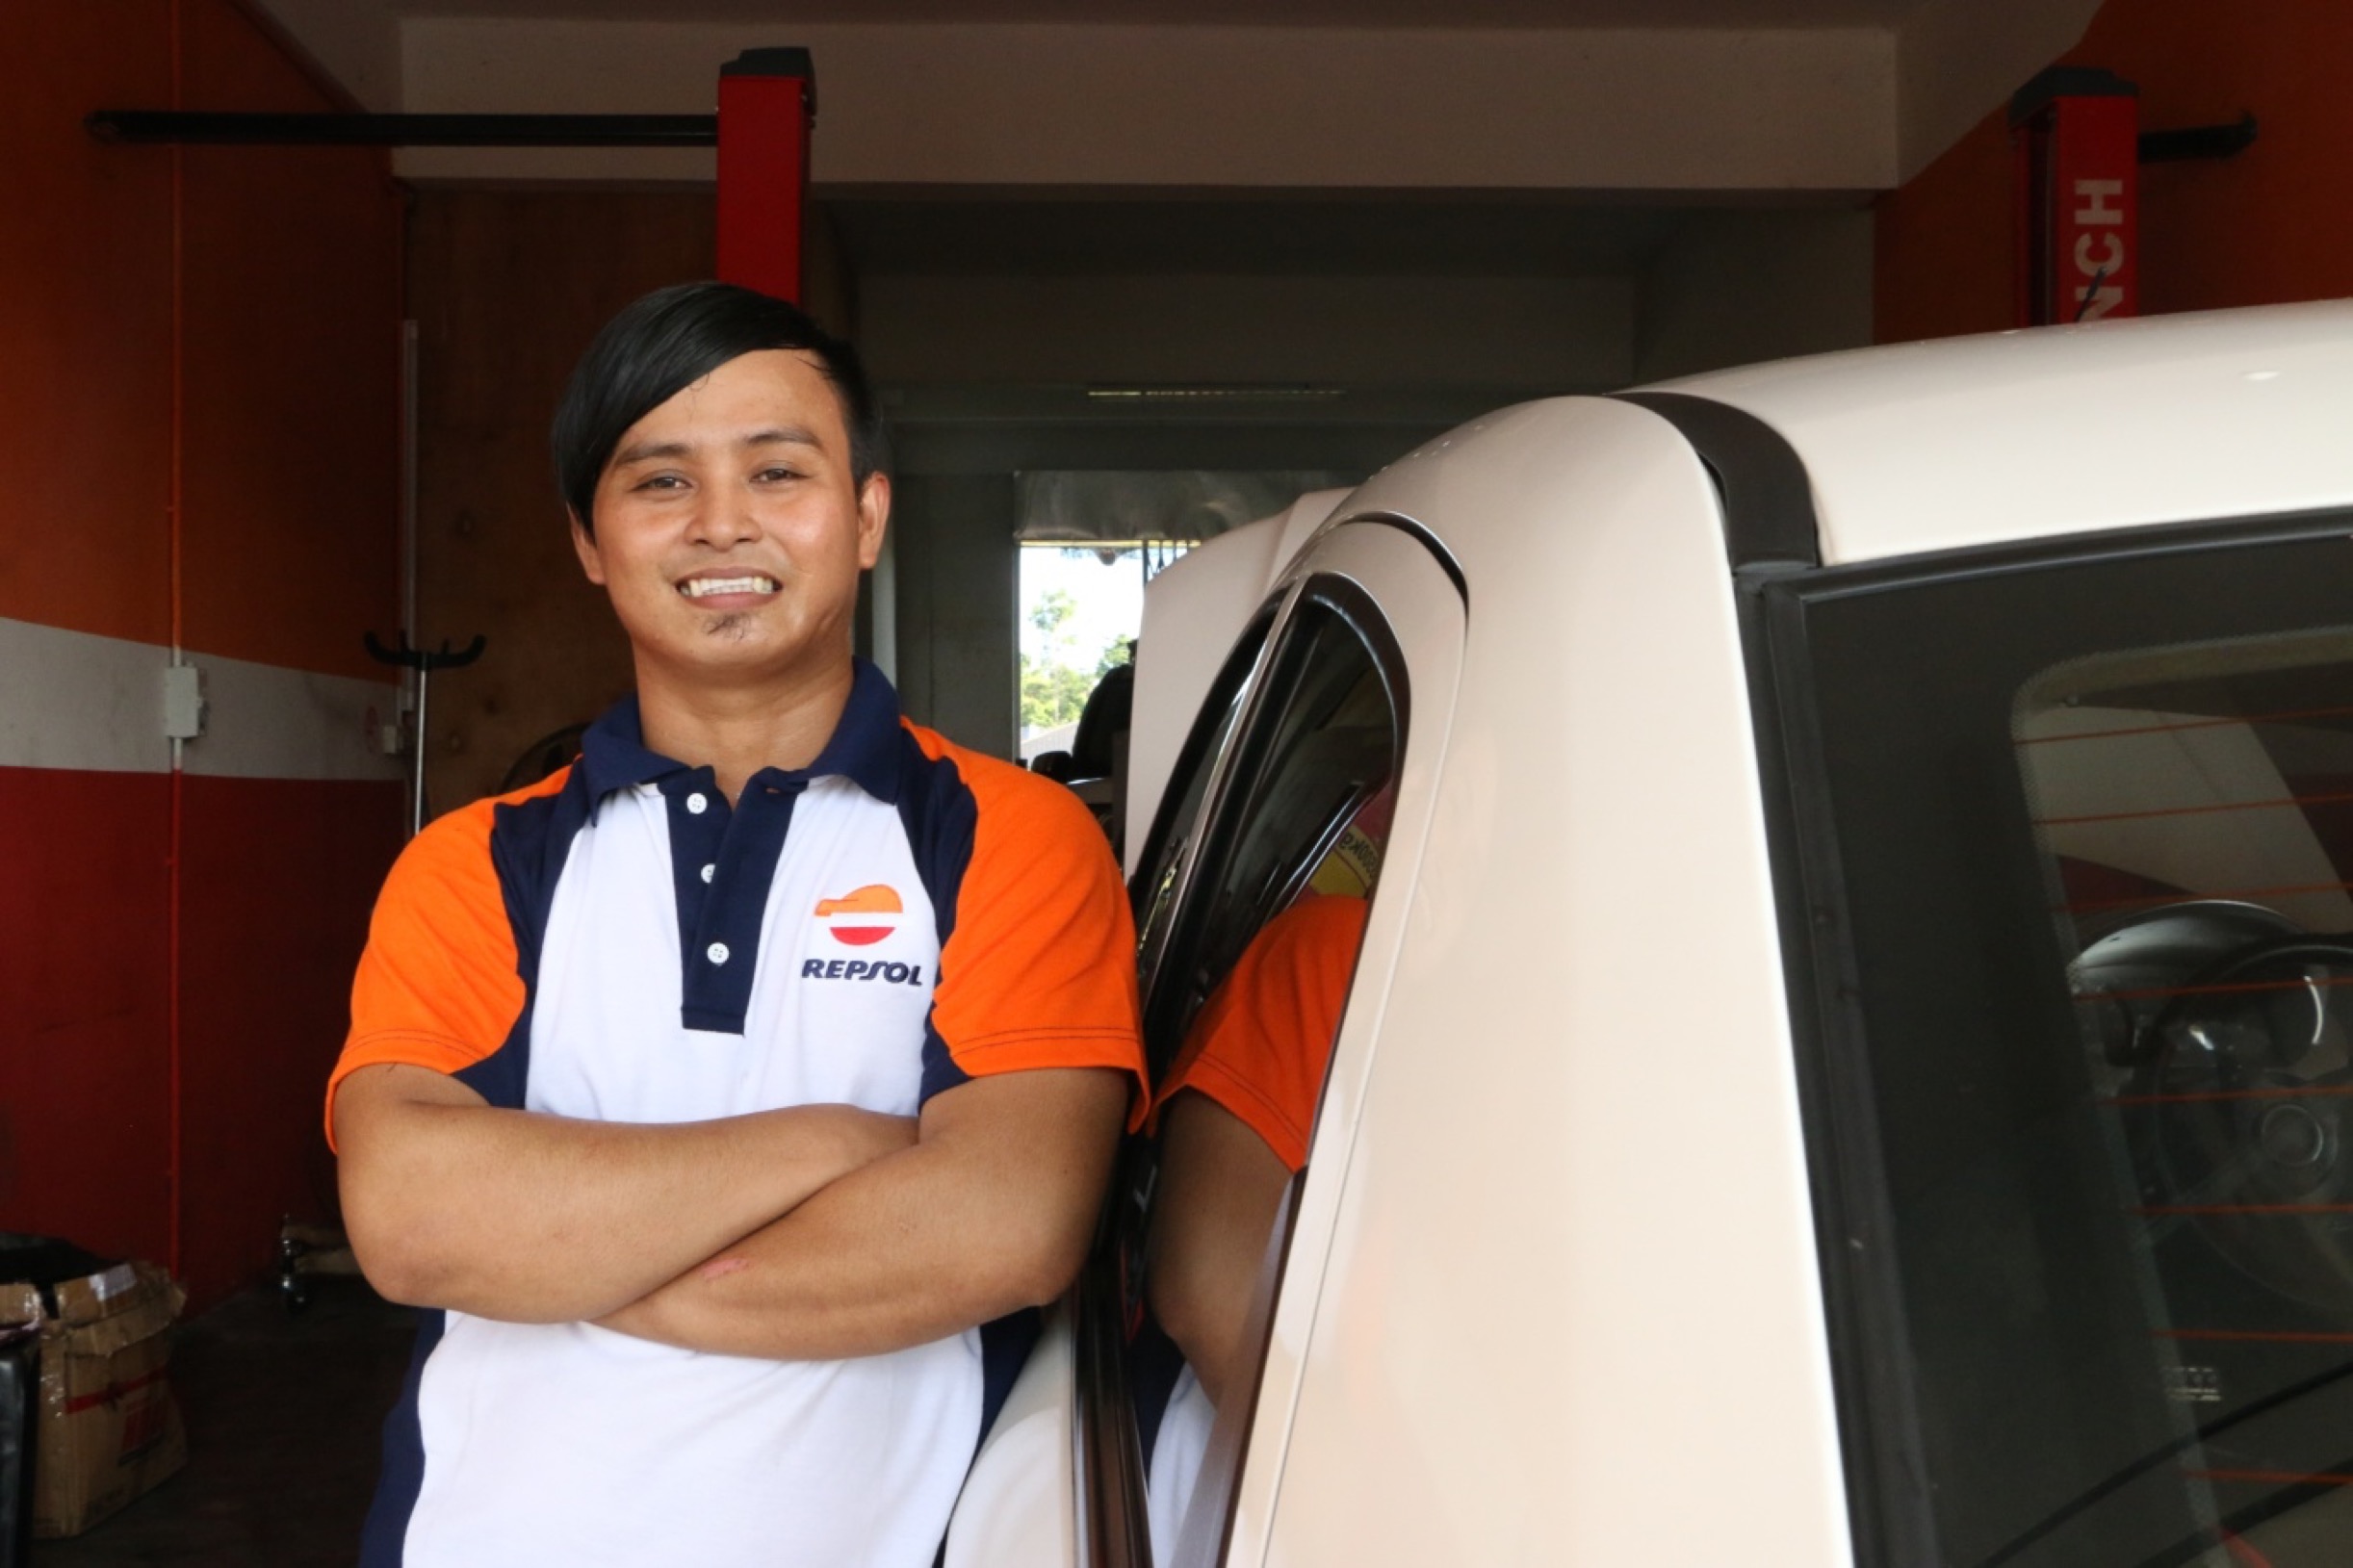 From car wash attendant to car workshop owner